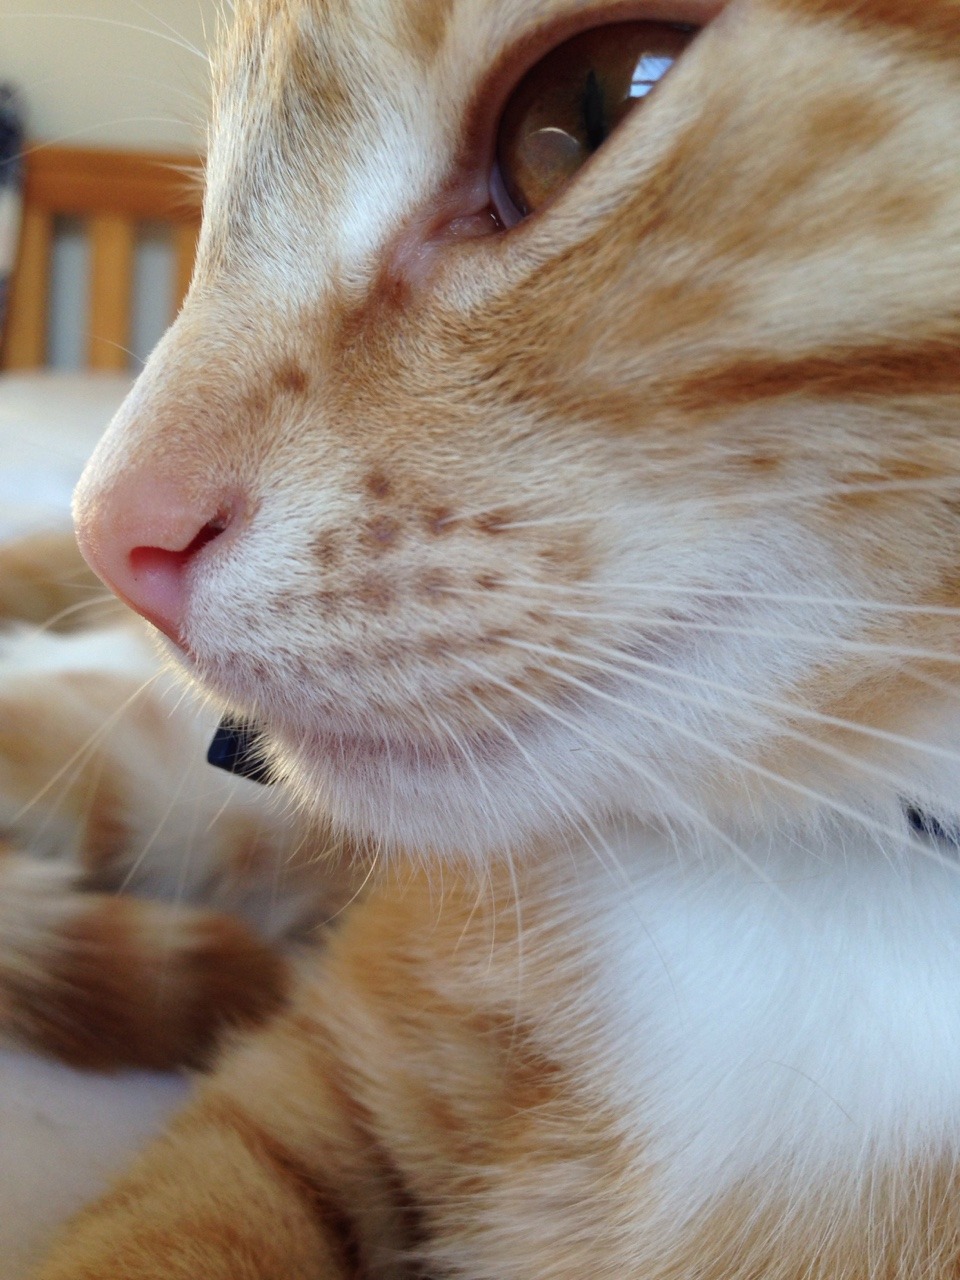 lost-lil-kitty:  I love my kitties nose!